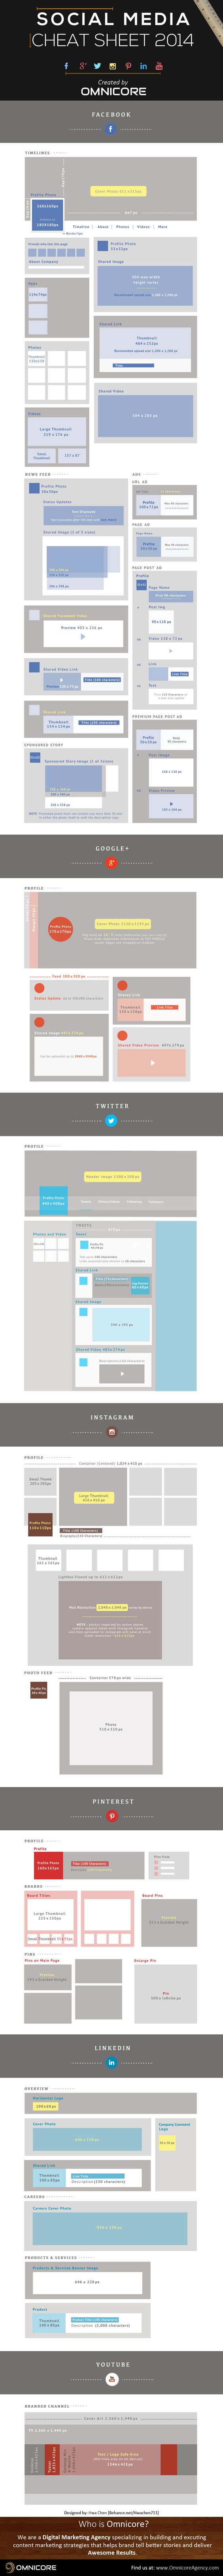 The Essential Social Media Design and Sizing Cheat Sheet